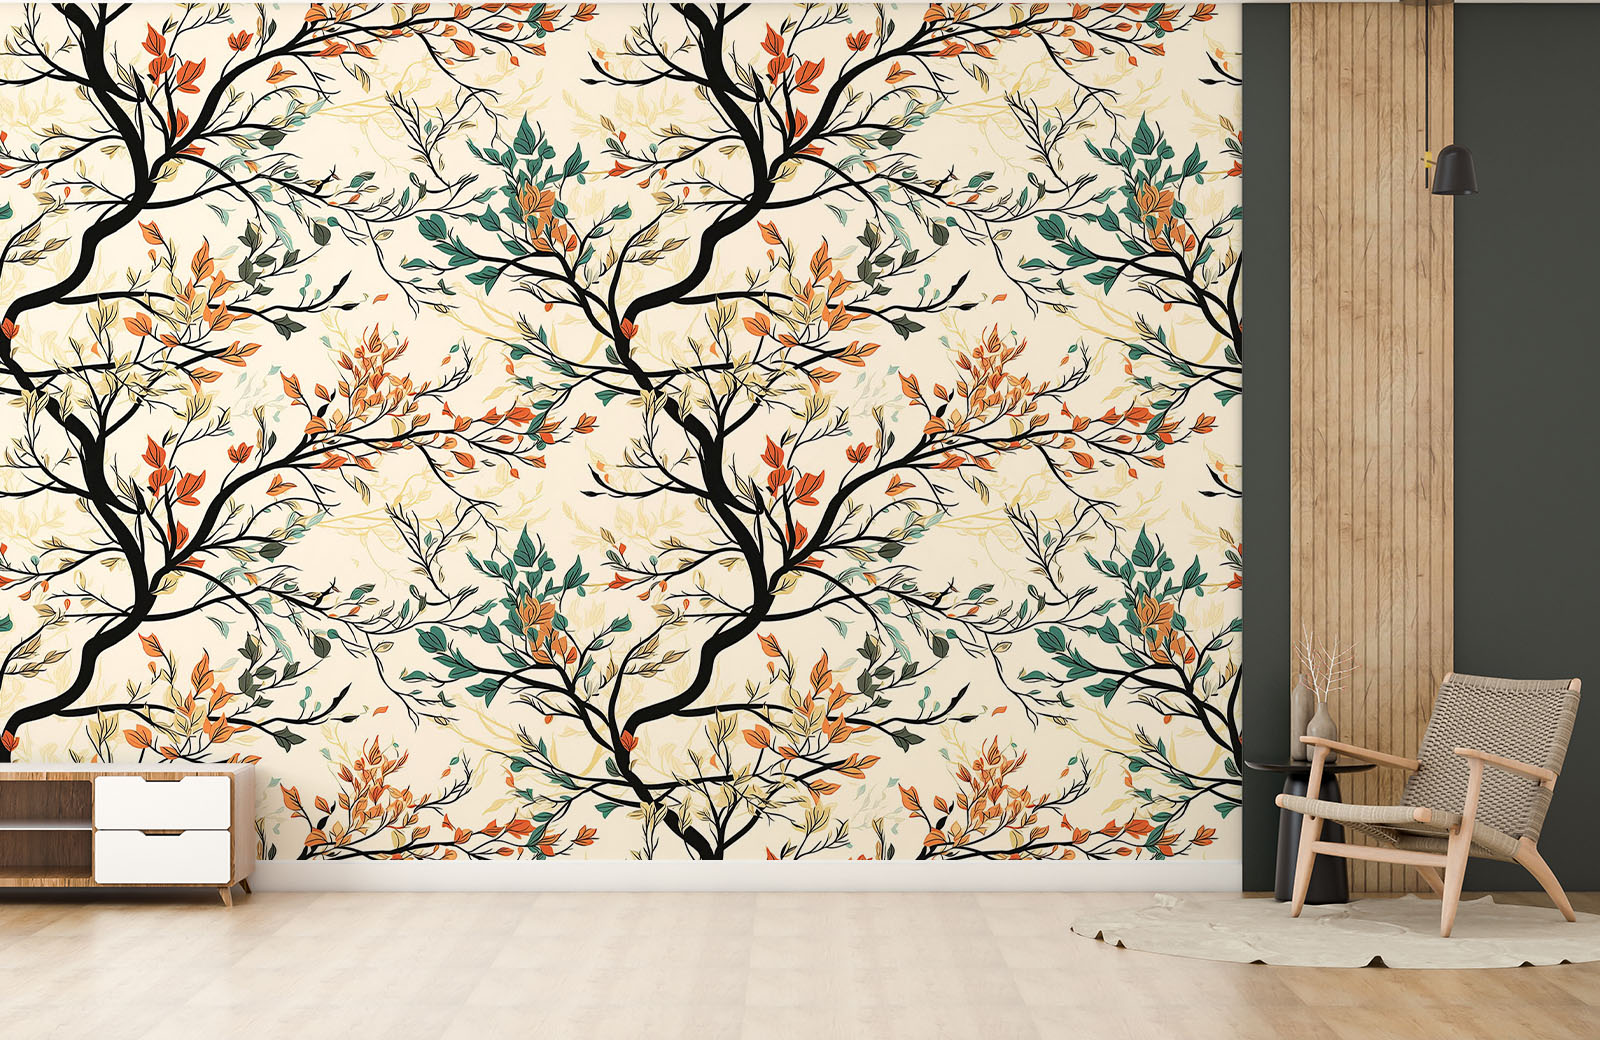 multi-coloured-leaves-branches-drawing-wallpaper-with-chair